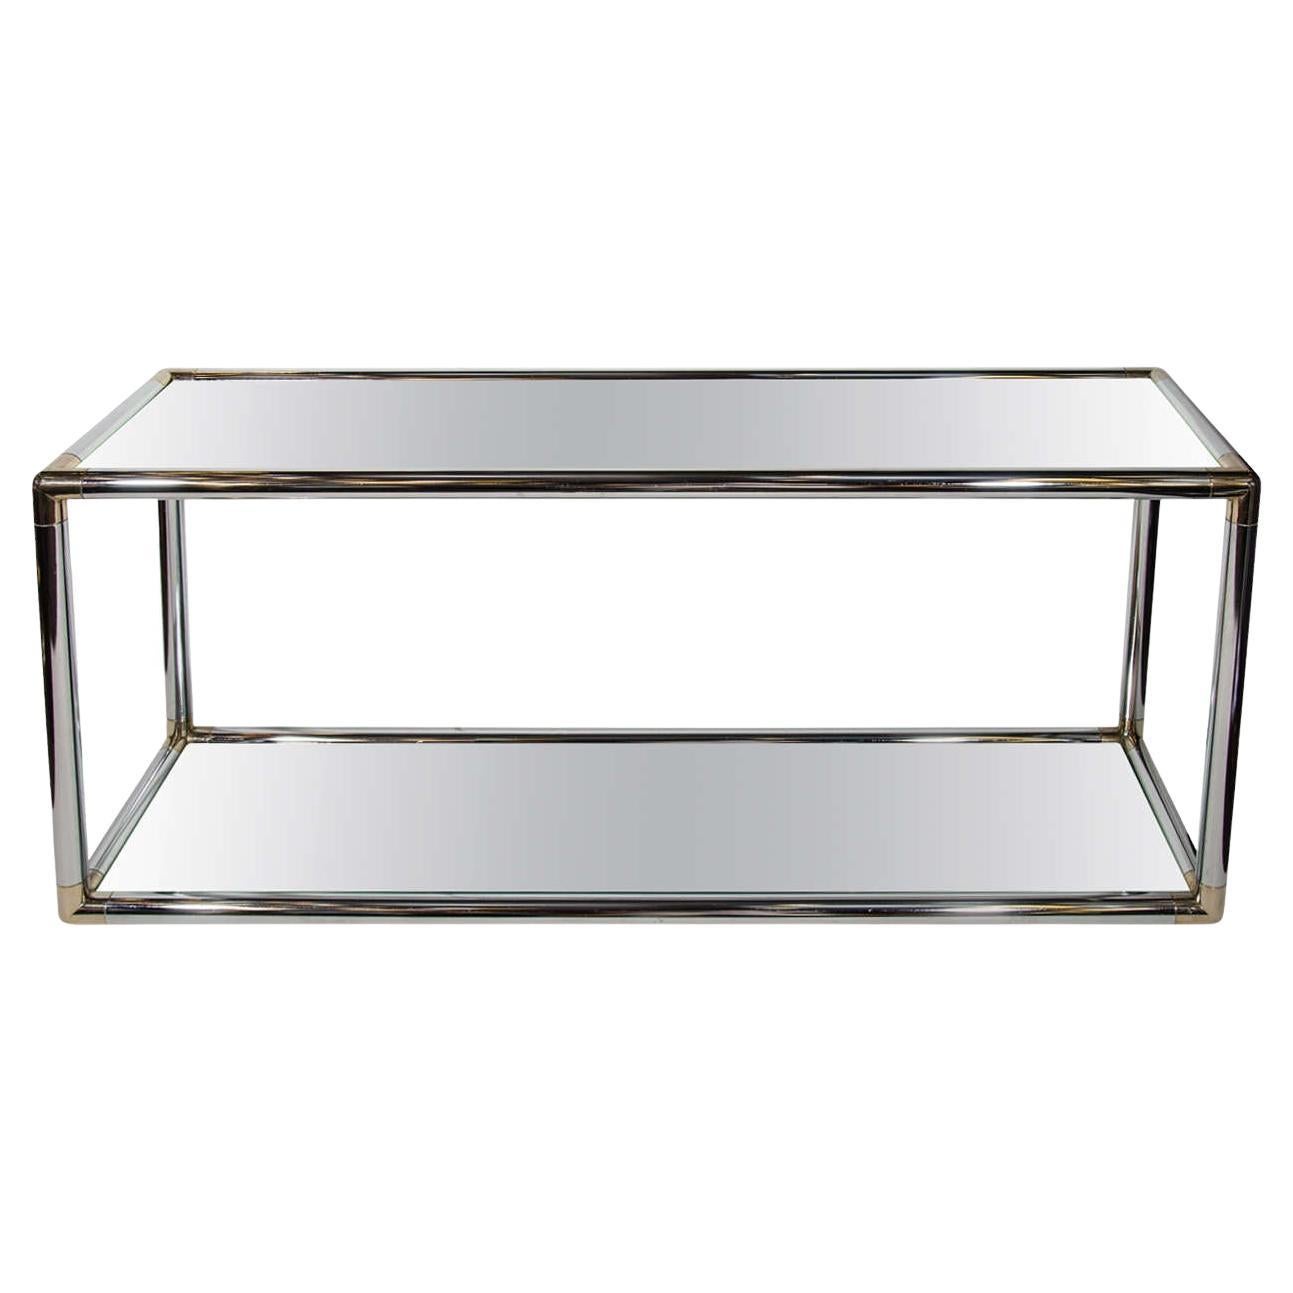 Mid-Century Modern Chrome and Mirror Two-Tier Console Table, Italy c. 1970's For Sale